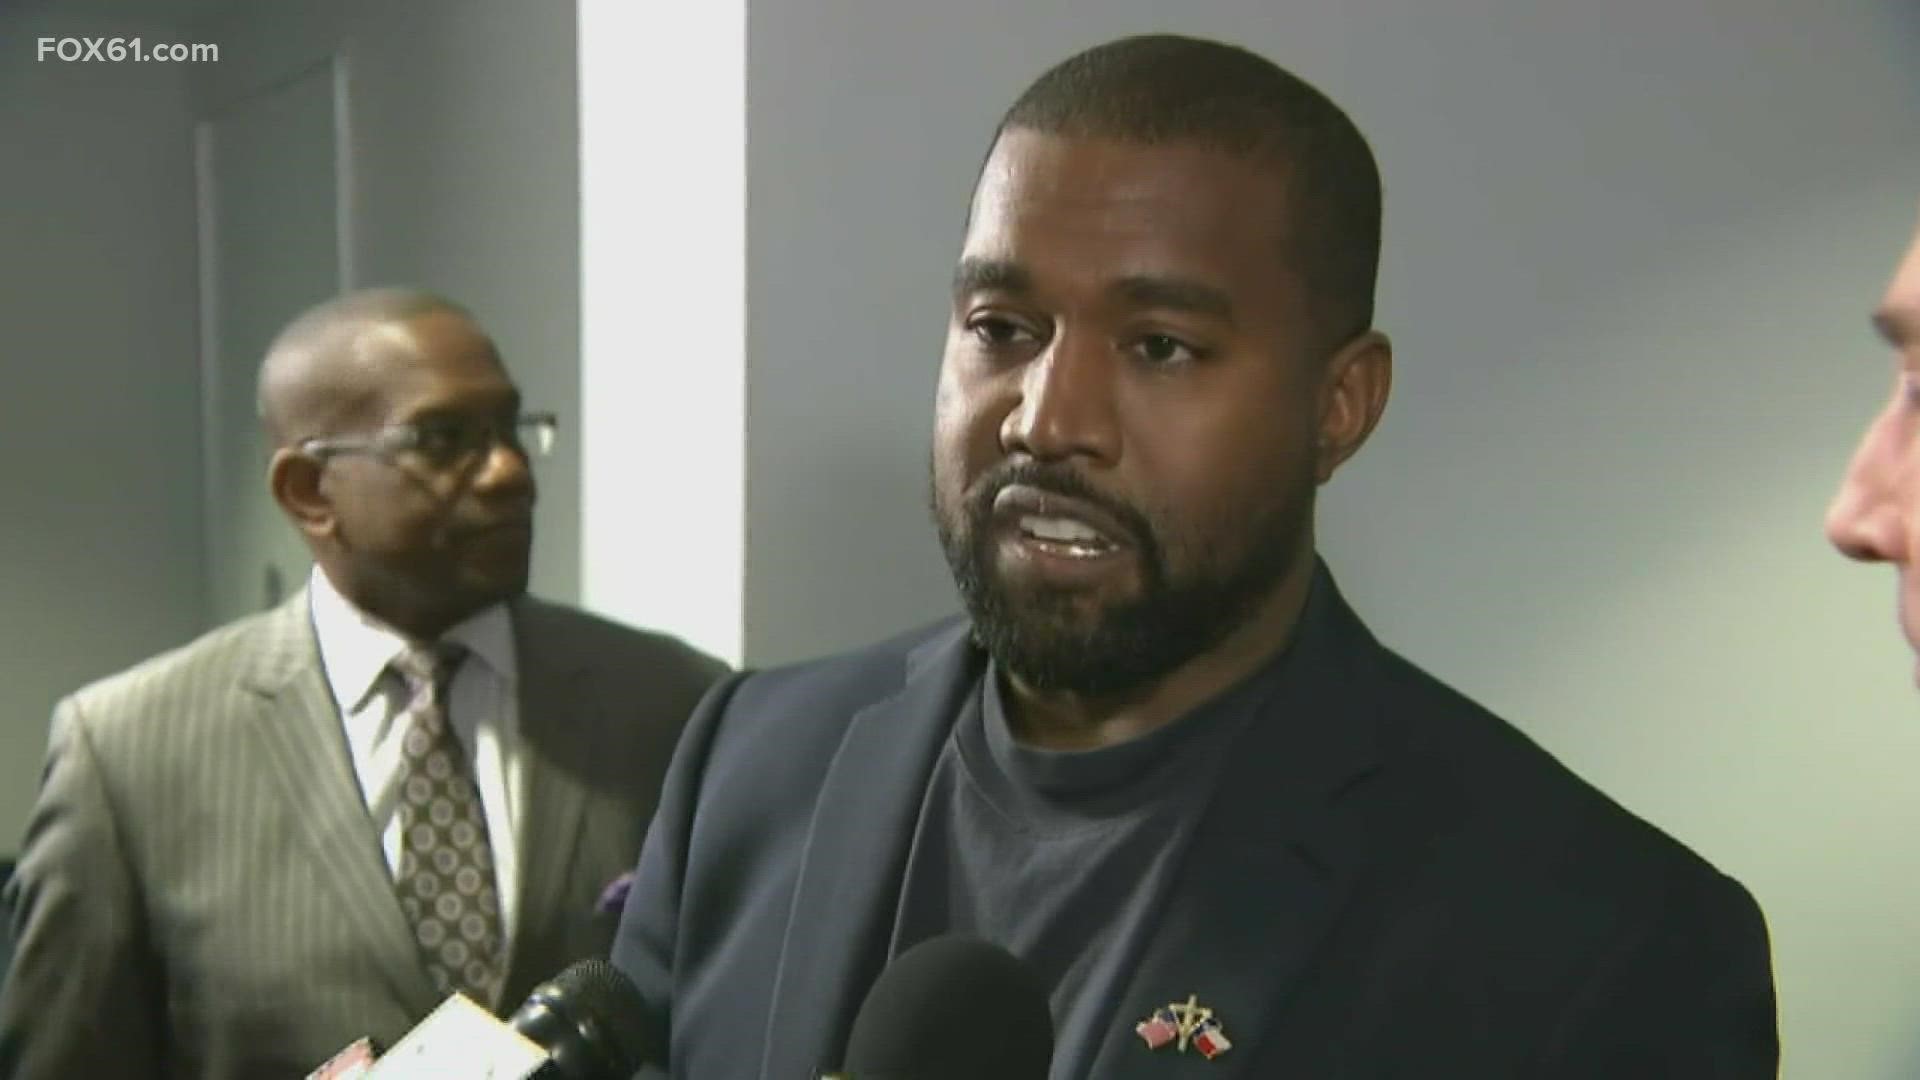 Kanye West has been named in a battery investigation after an incident Thursday; Cardi B's fans rally around the singer during defamation lawsuit